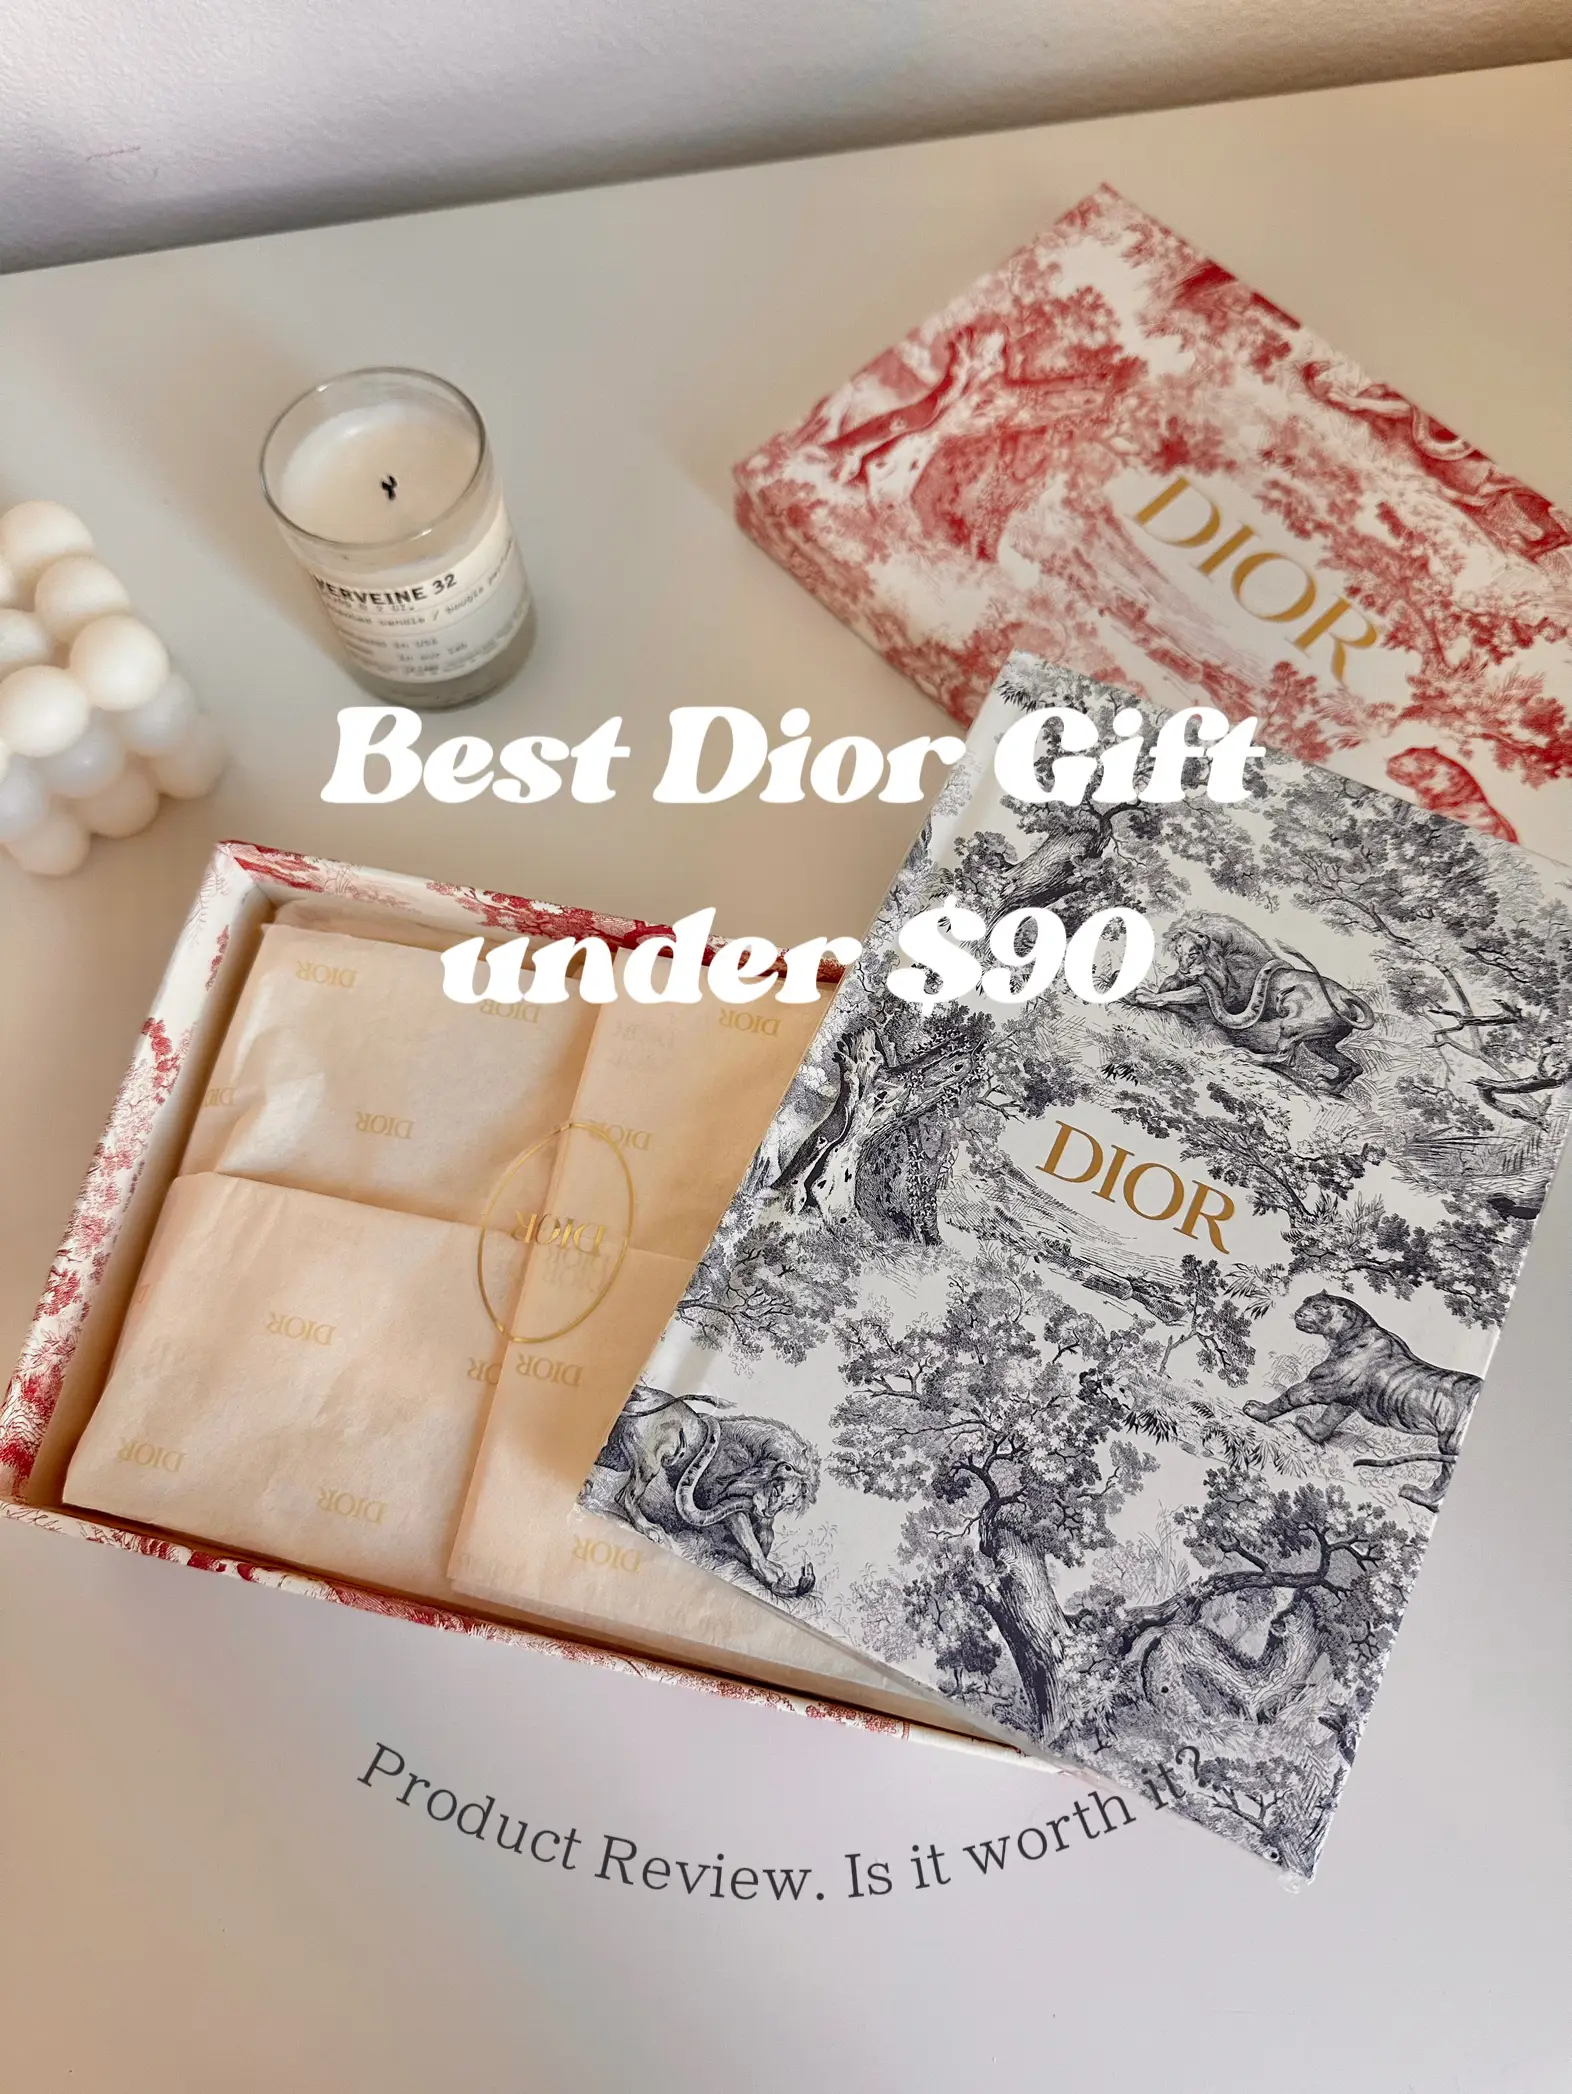 Best Dior Gift Under $90: Review, Gallery posted by Vera